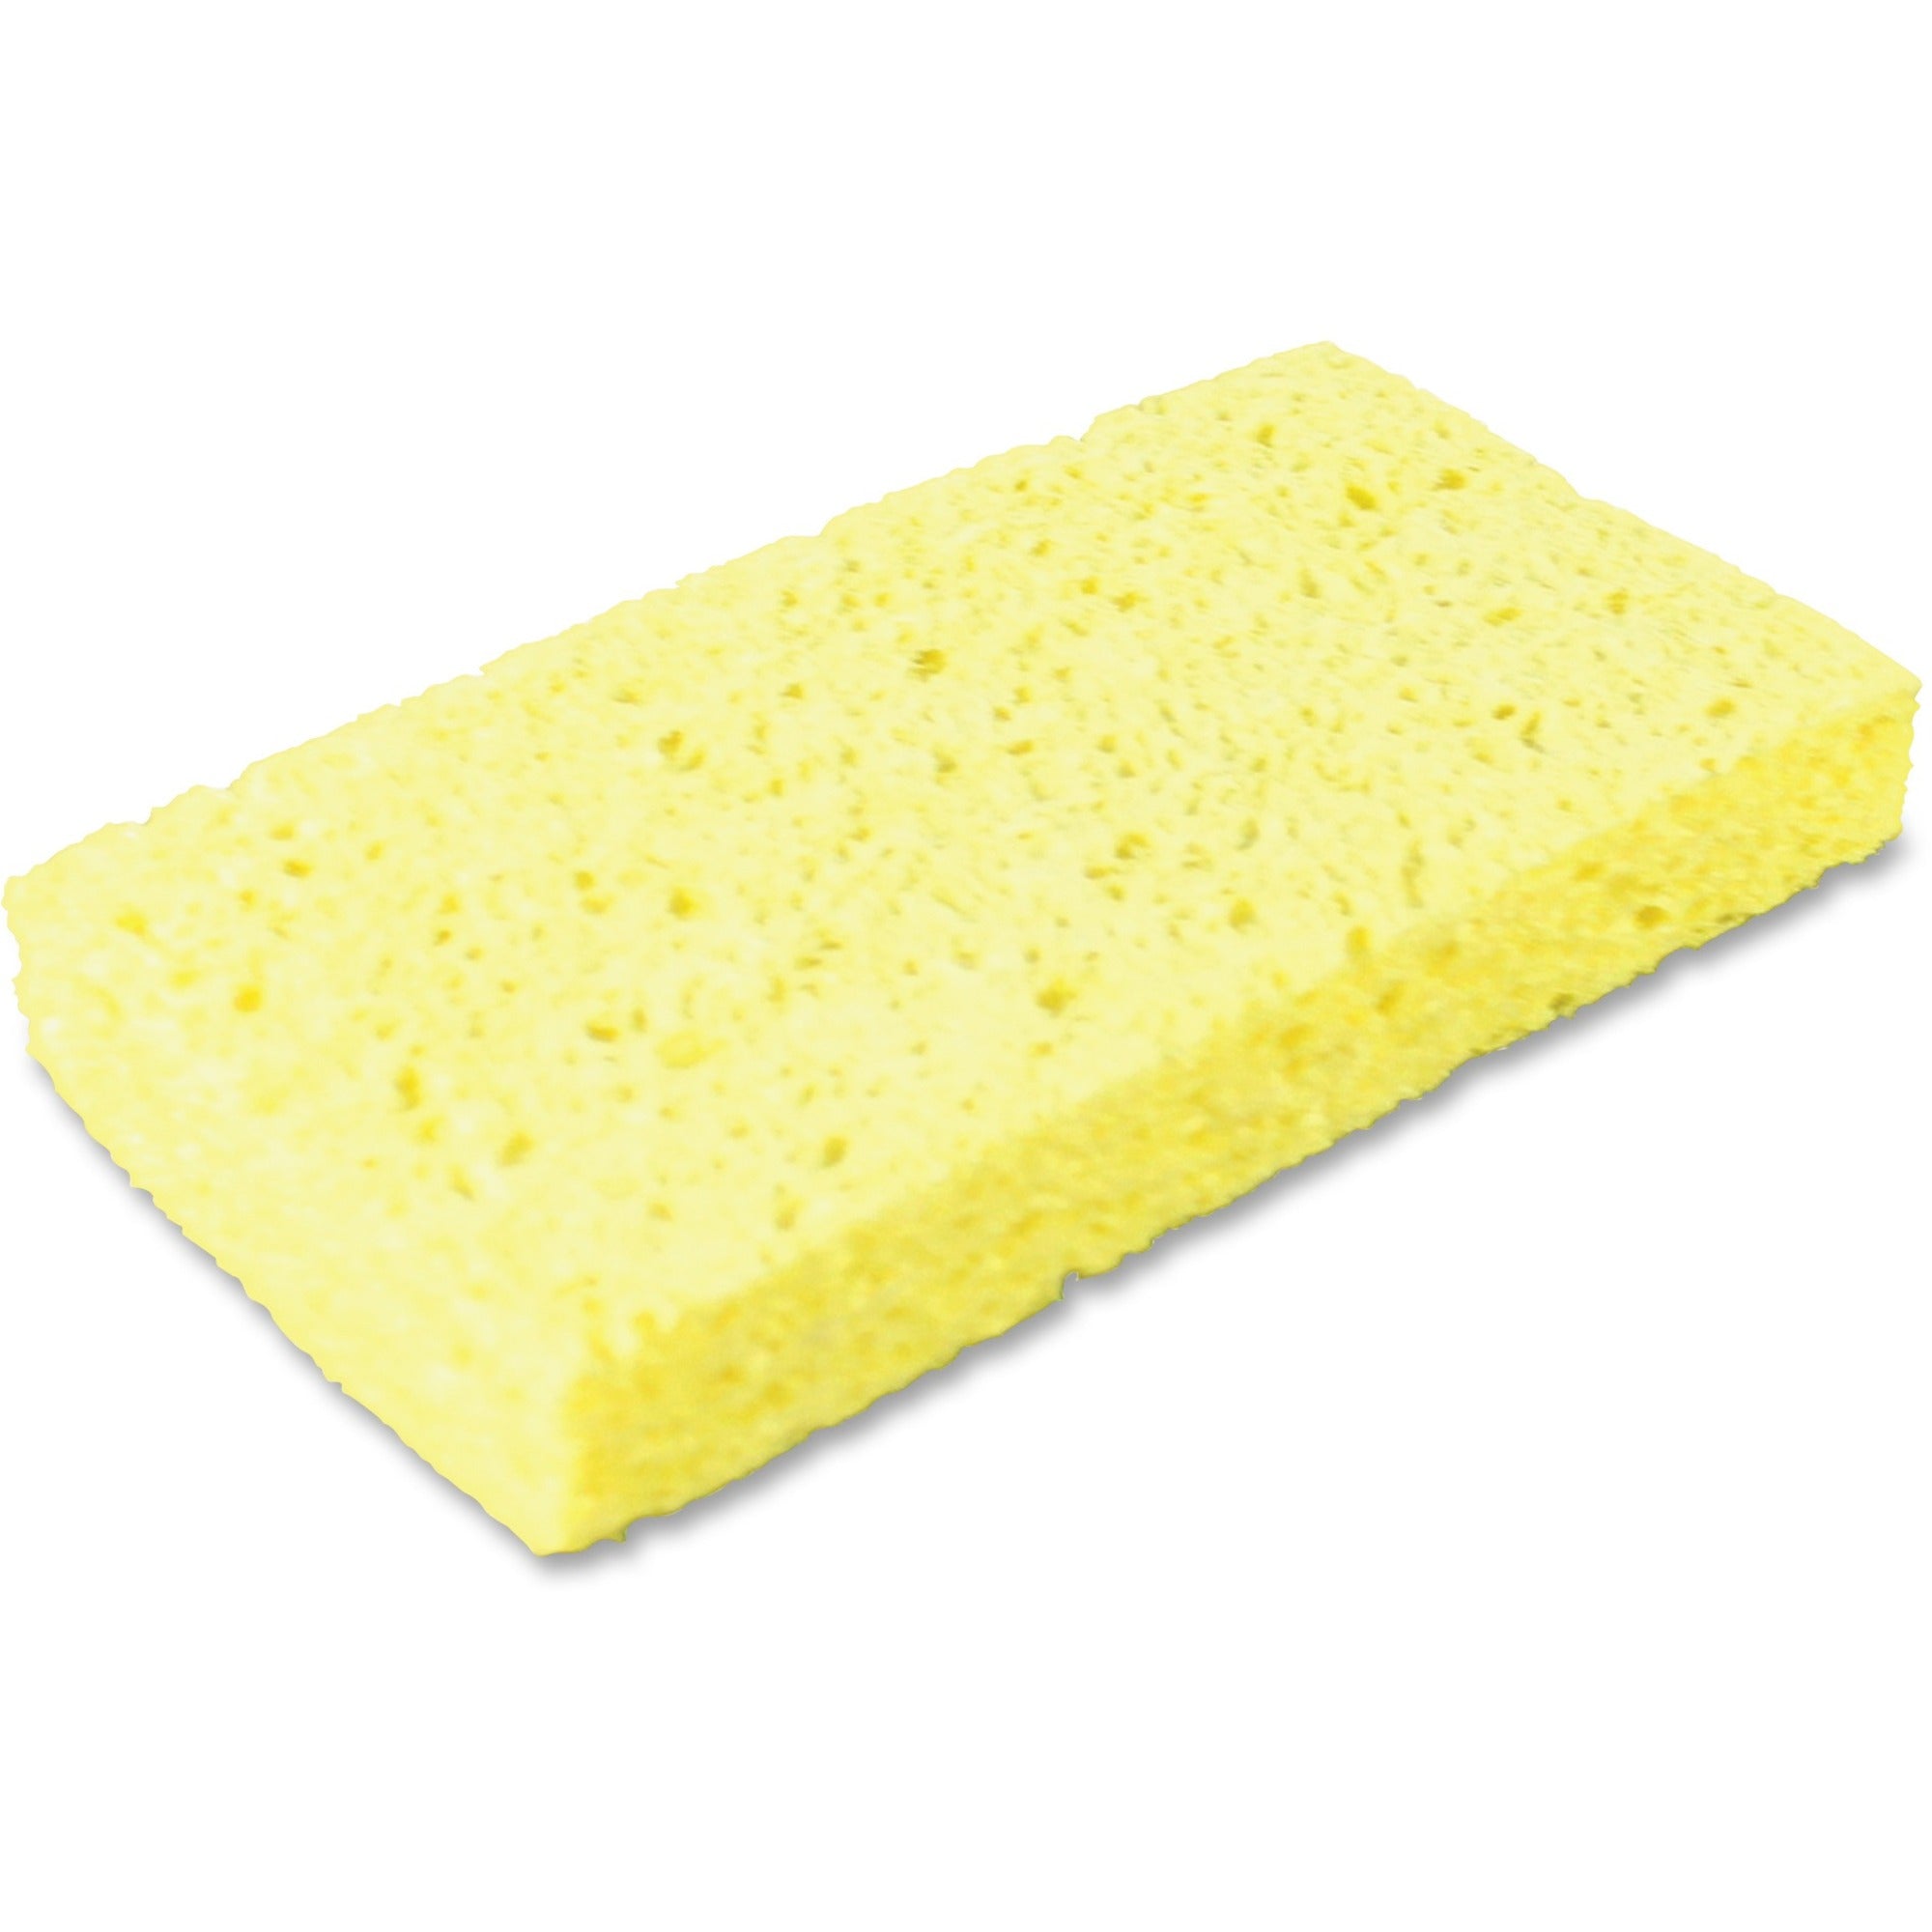 Impact Small Cellulose Sponge - 1" Height x 3.4" Width x 6.3" Length - 6/Pack - Cellulose - Yellow - 